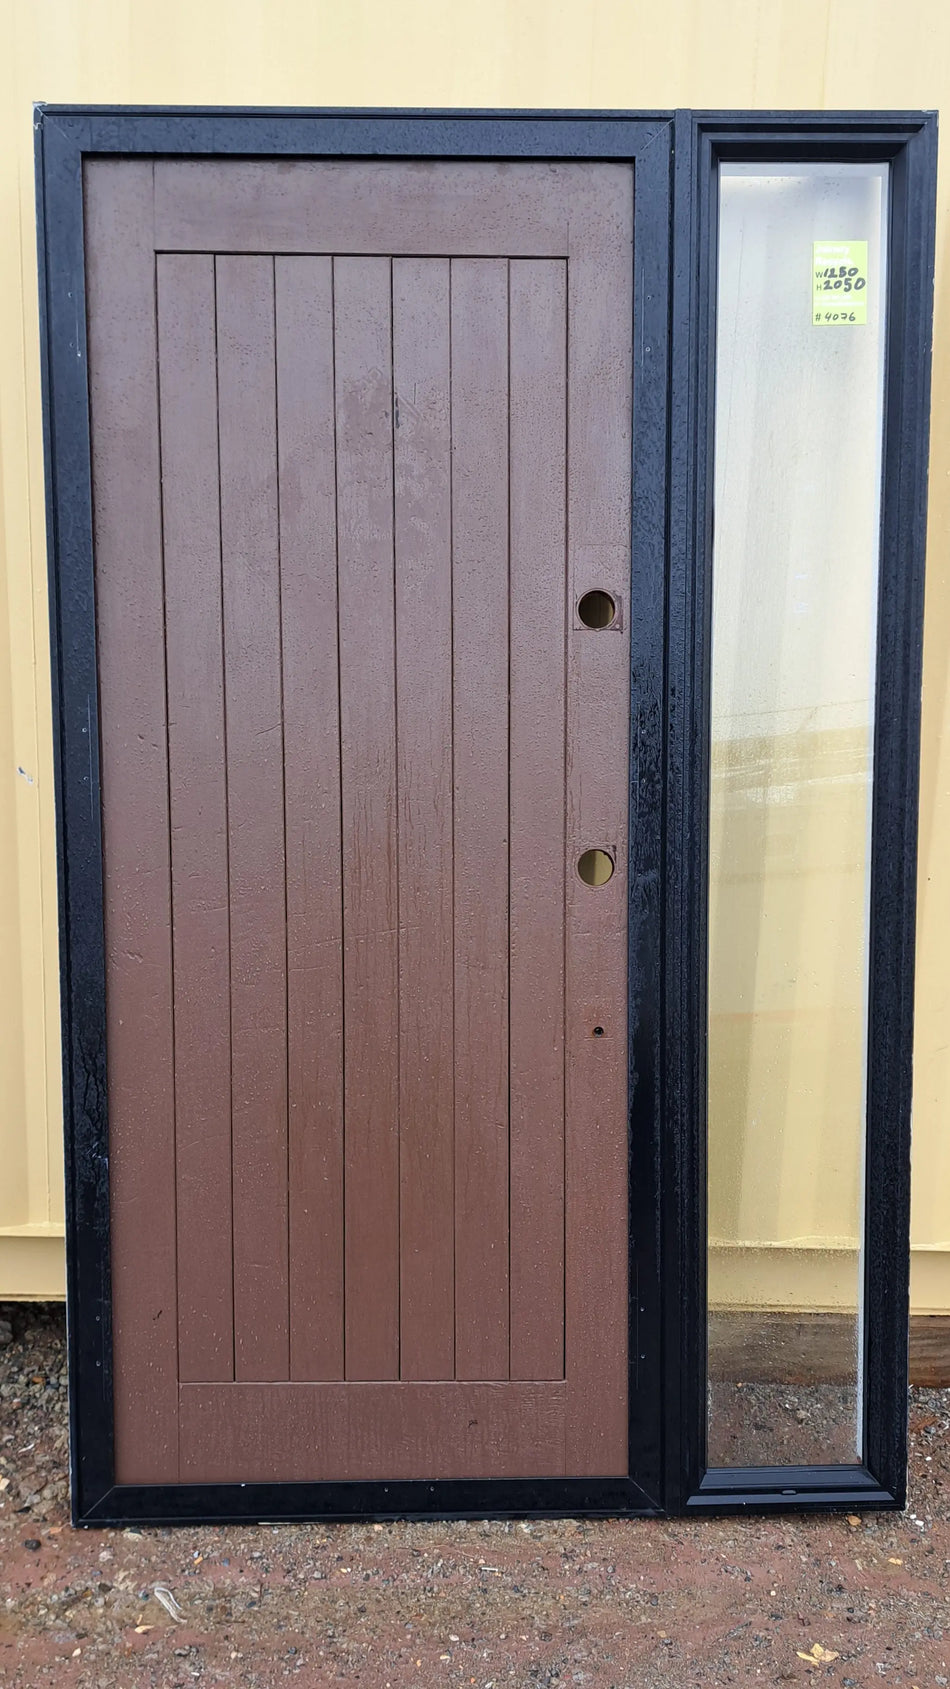 Wooden Entrance Door with Sidelight 1250 W x 2050 H [#4076] $725 - Joinery Recycle